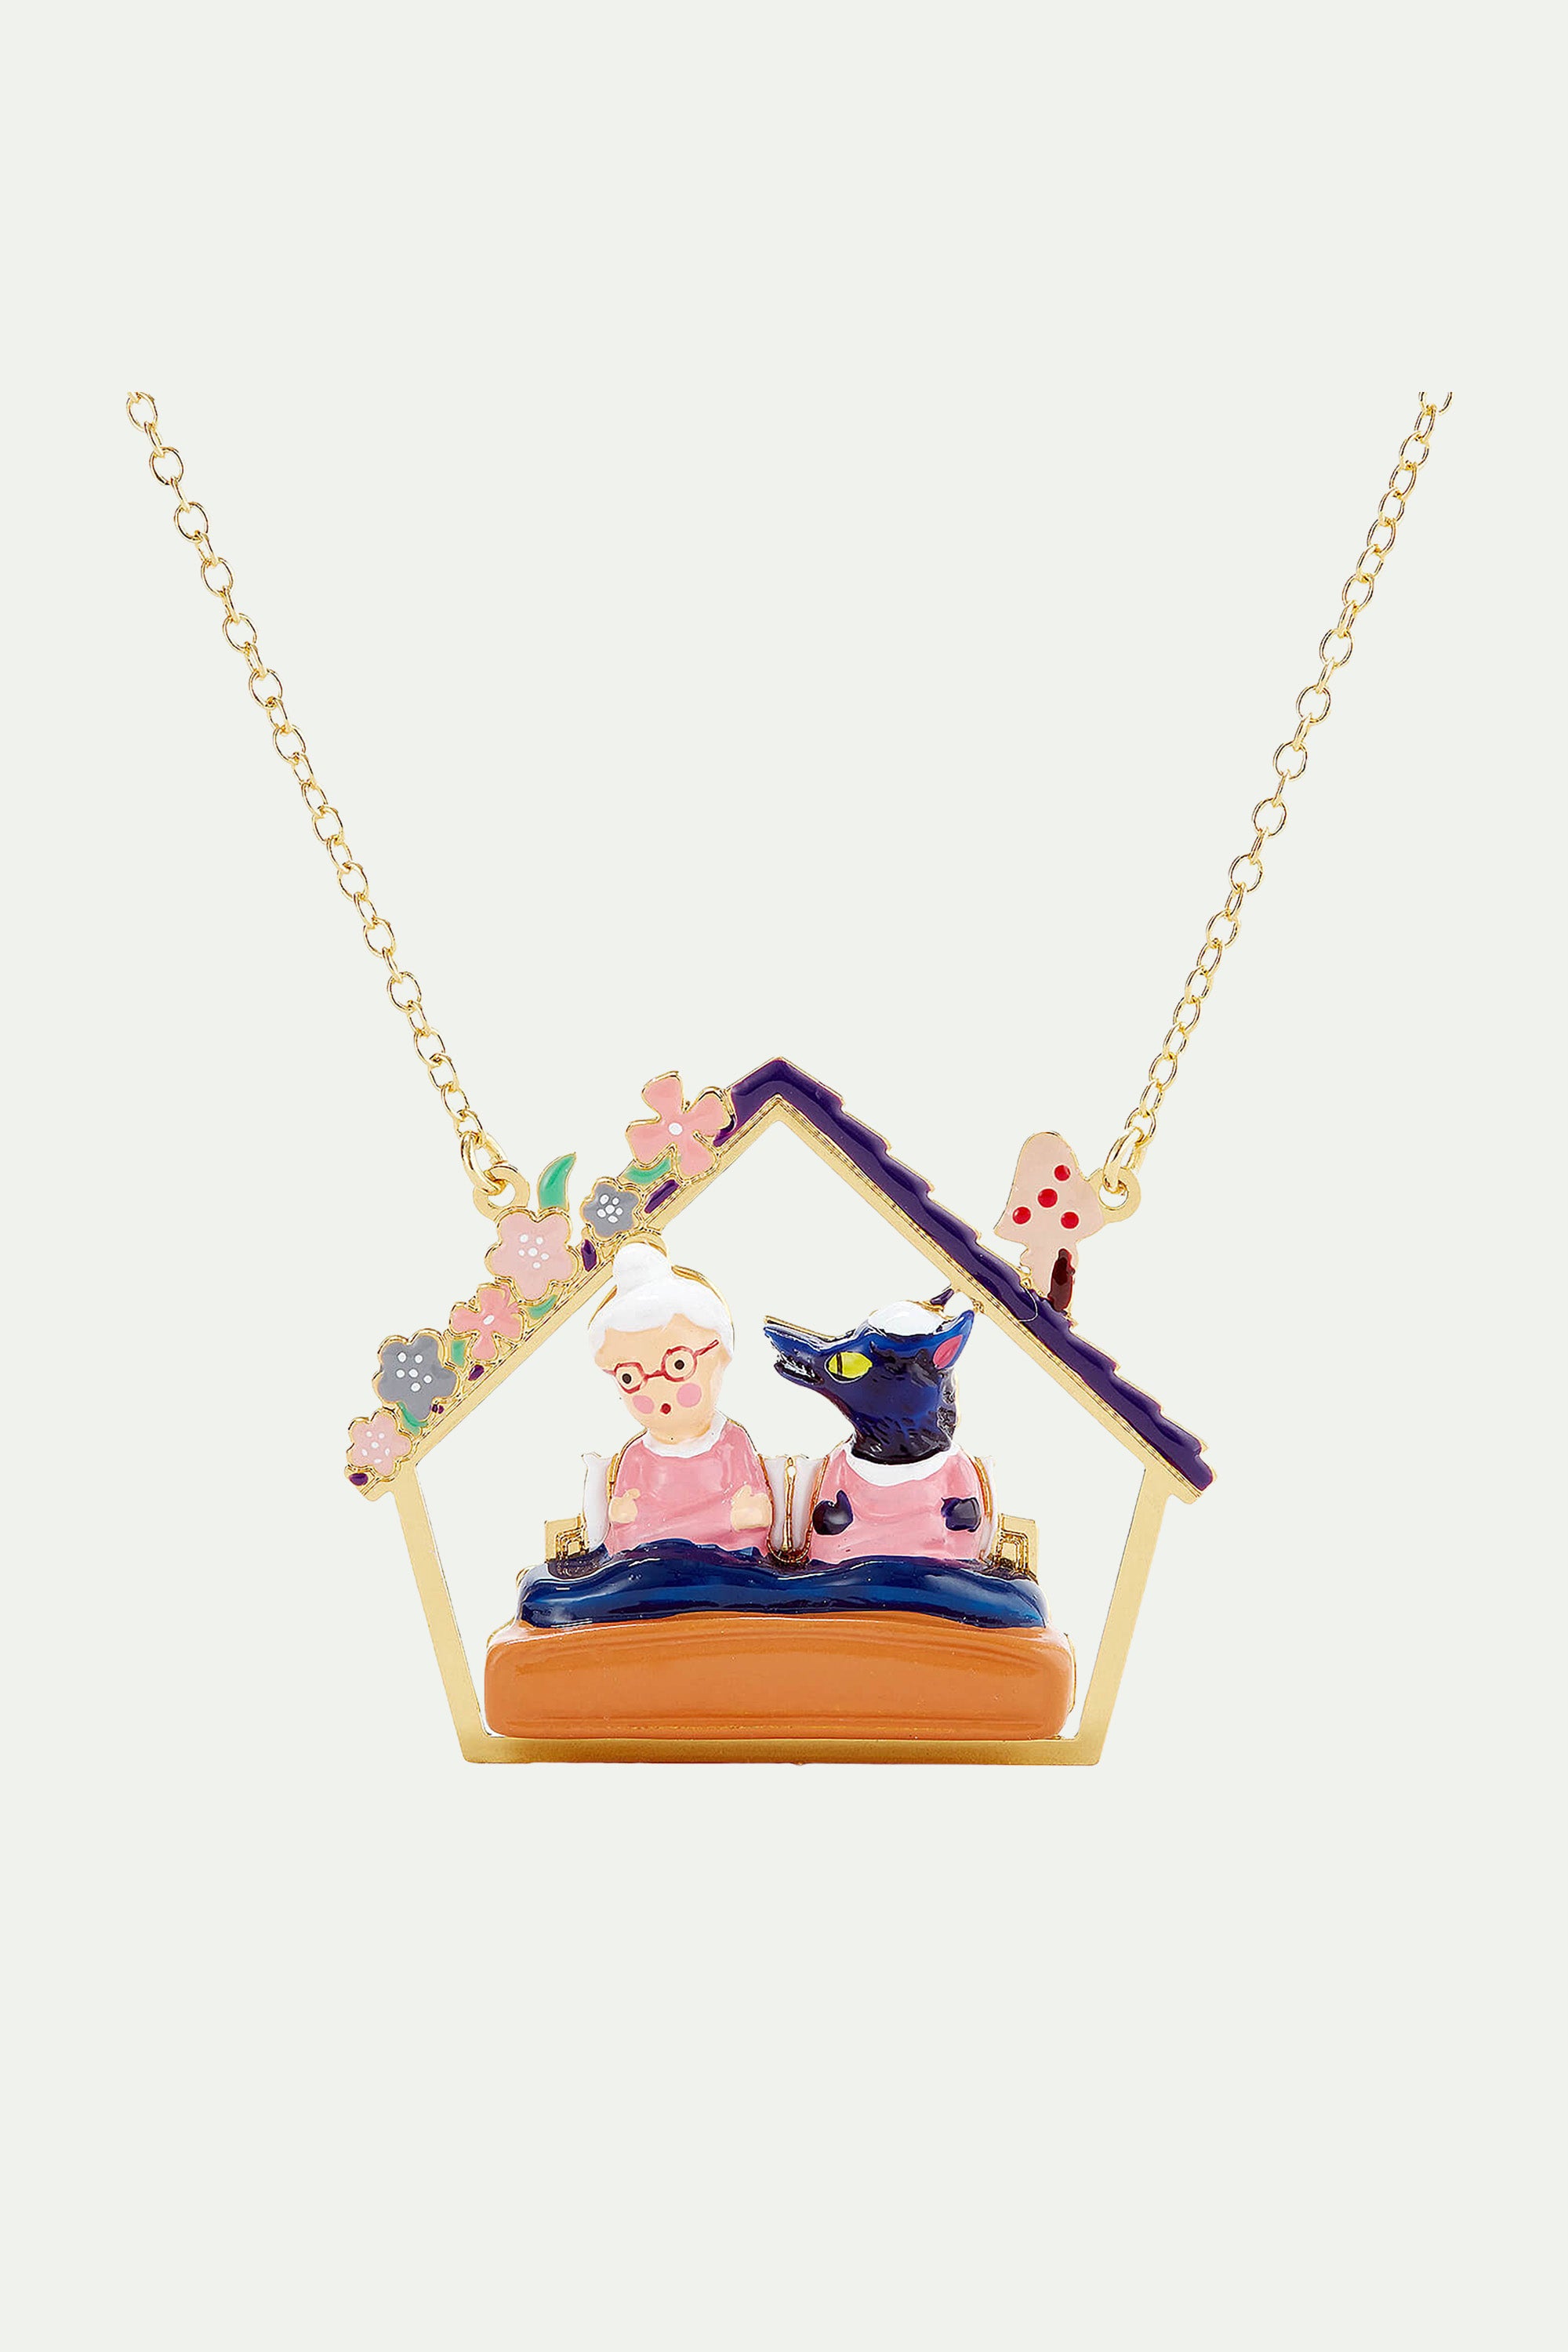 Grandmother and Big Bad Wolf pendant necklace